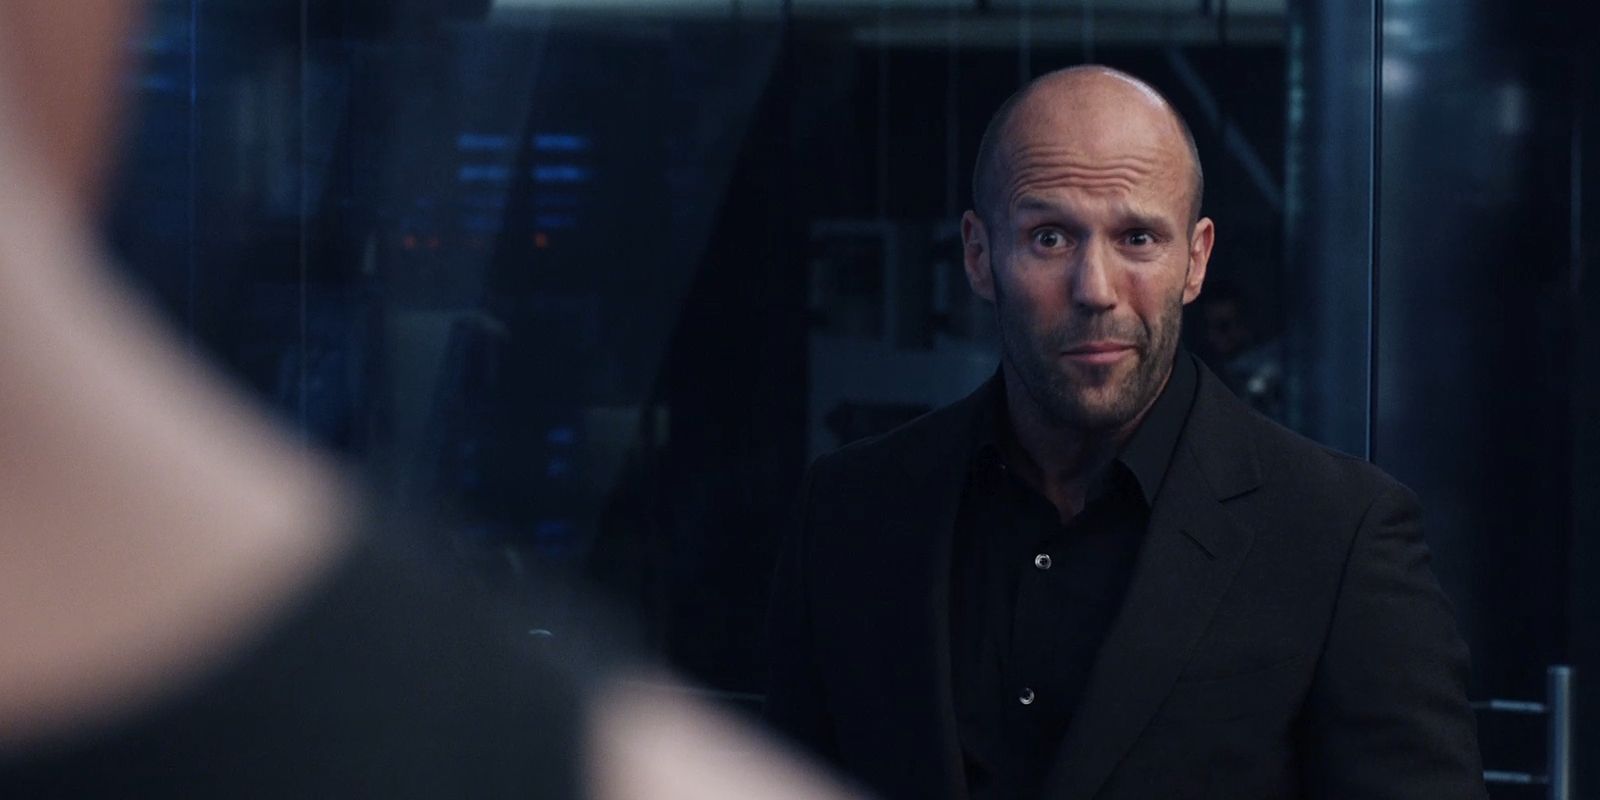 Fate of the Furious Deckard Shaw Joins the Team